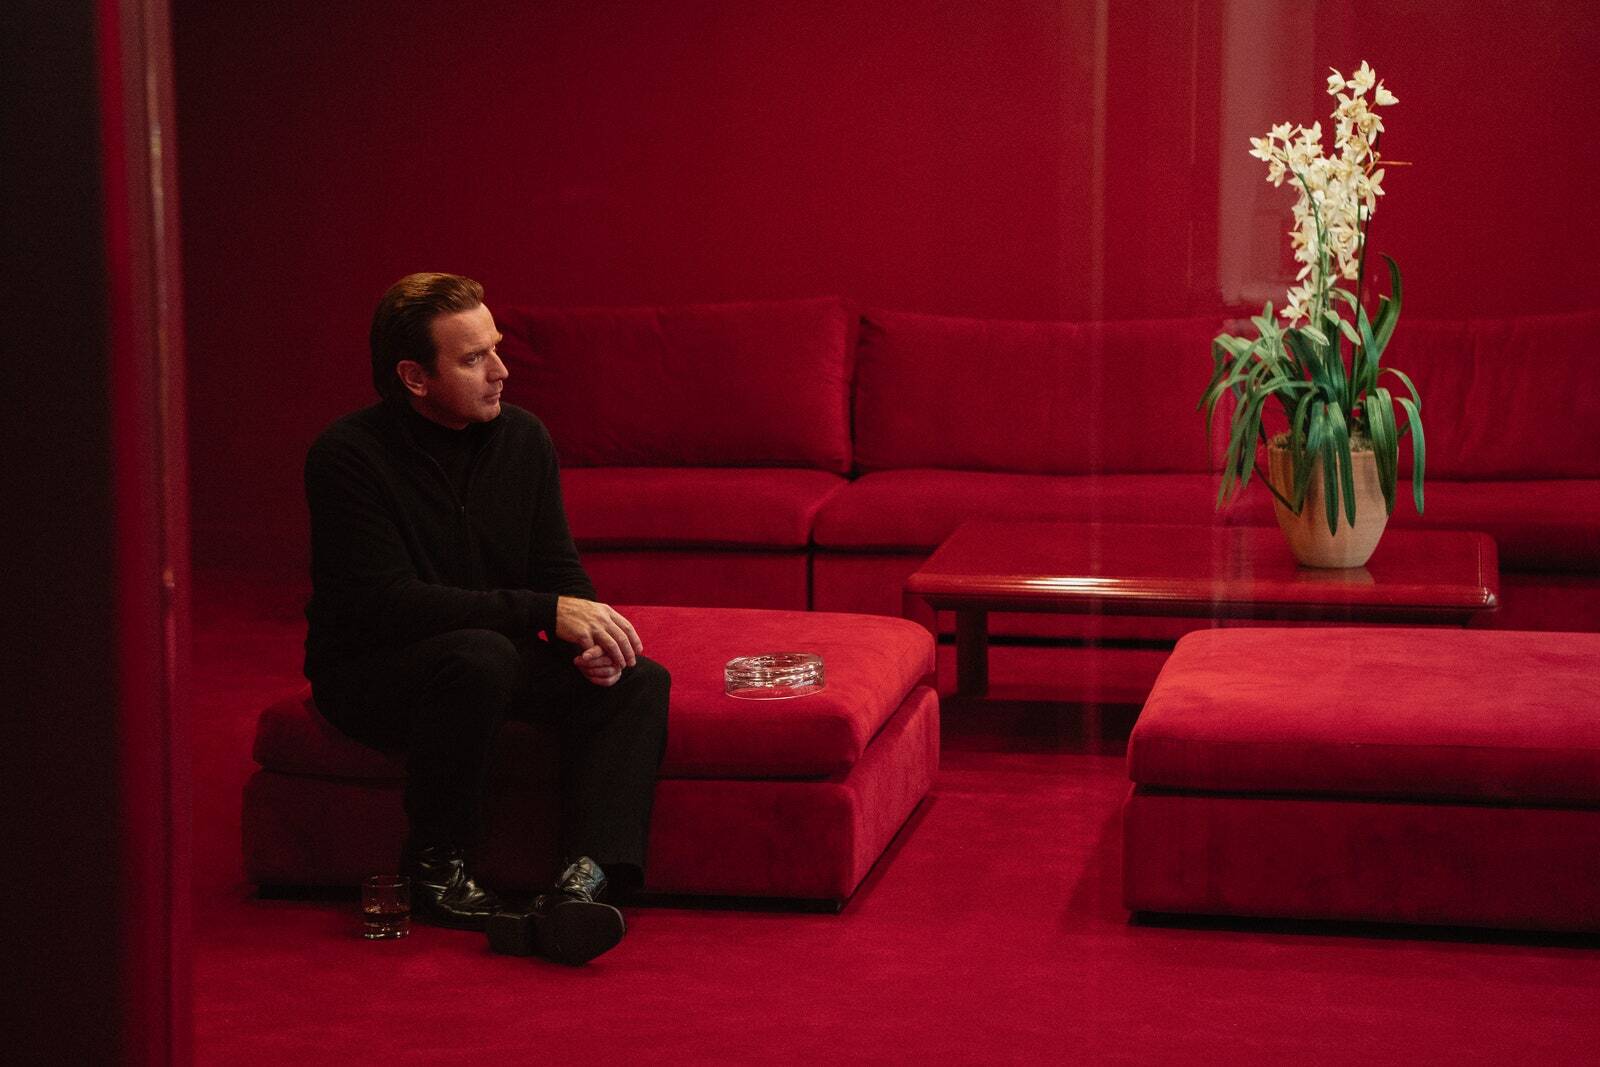 Halston (portrayed by Ewan MacGregor) admires one of his precious orchids in the new Netflix series on his life and career